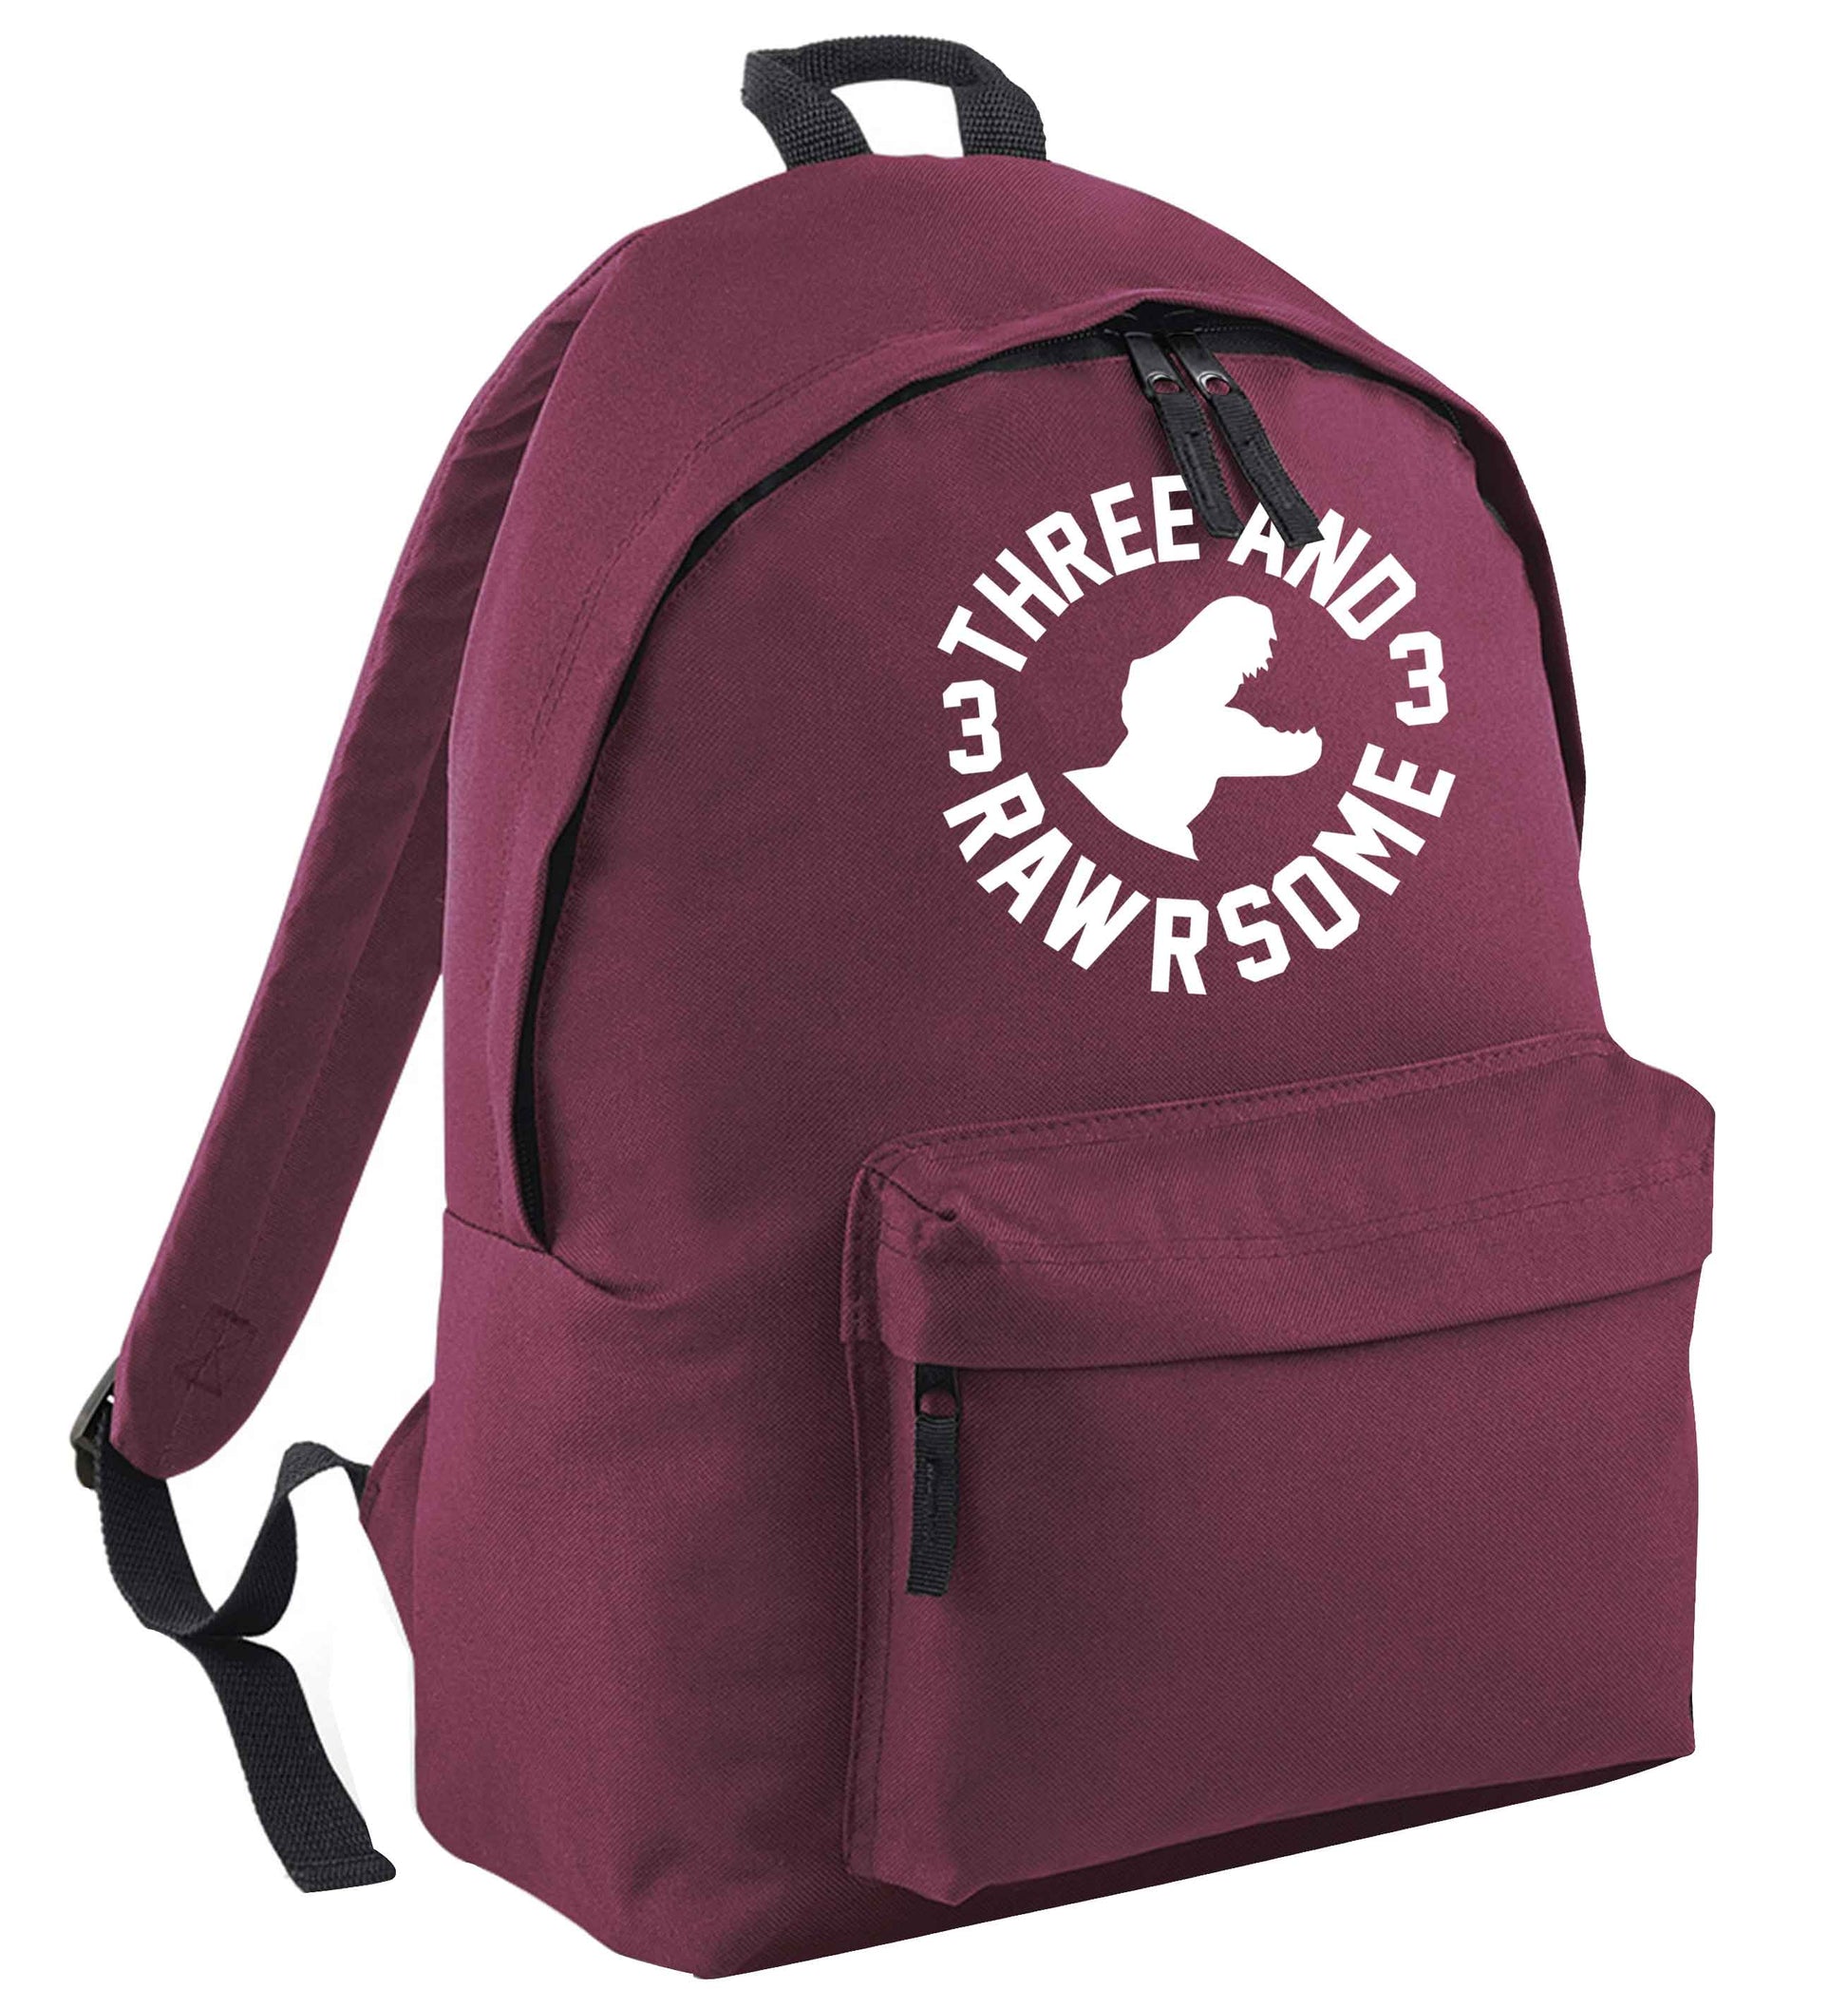 Three and rawrsome black adults backpack